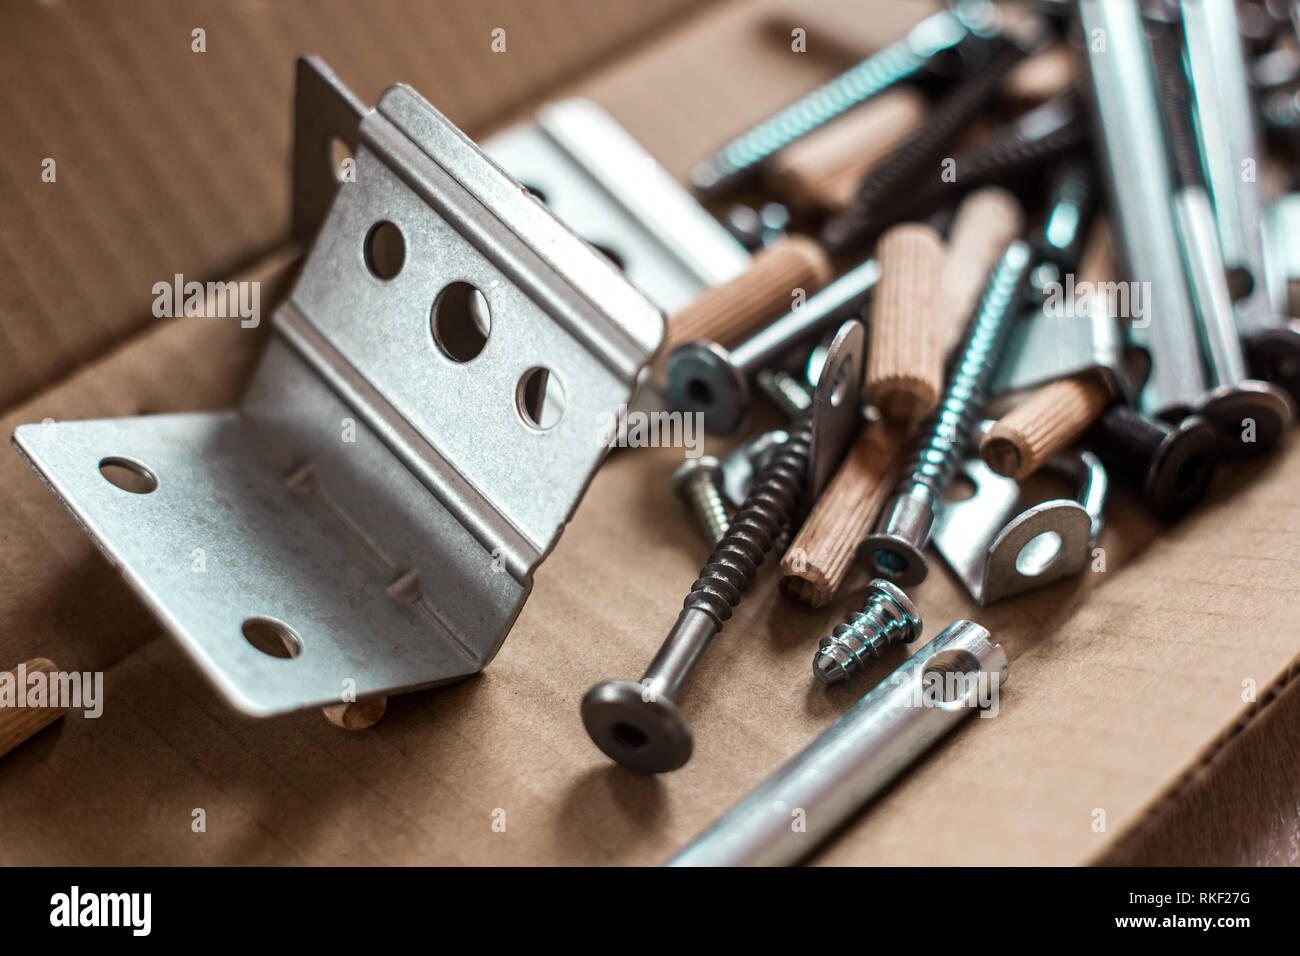 Furniture fittings, screws and other parts in open craft box lying on the floor, furniture assembly at home Stock Photo